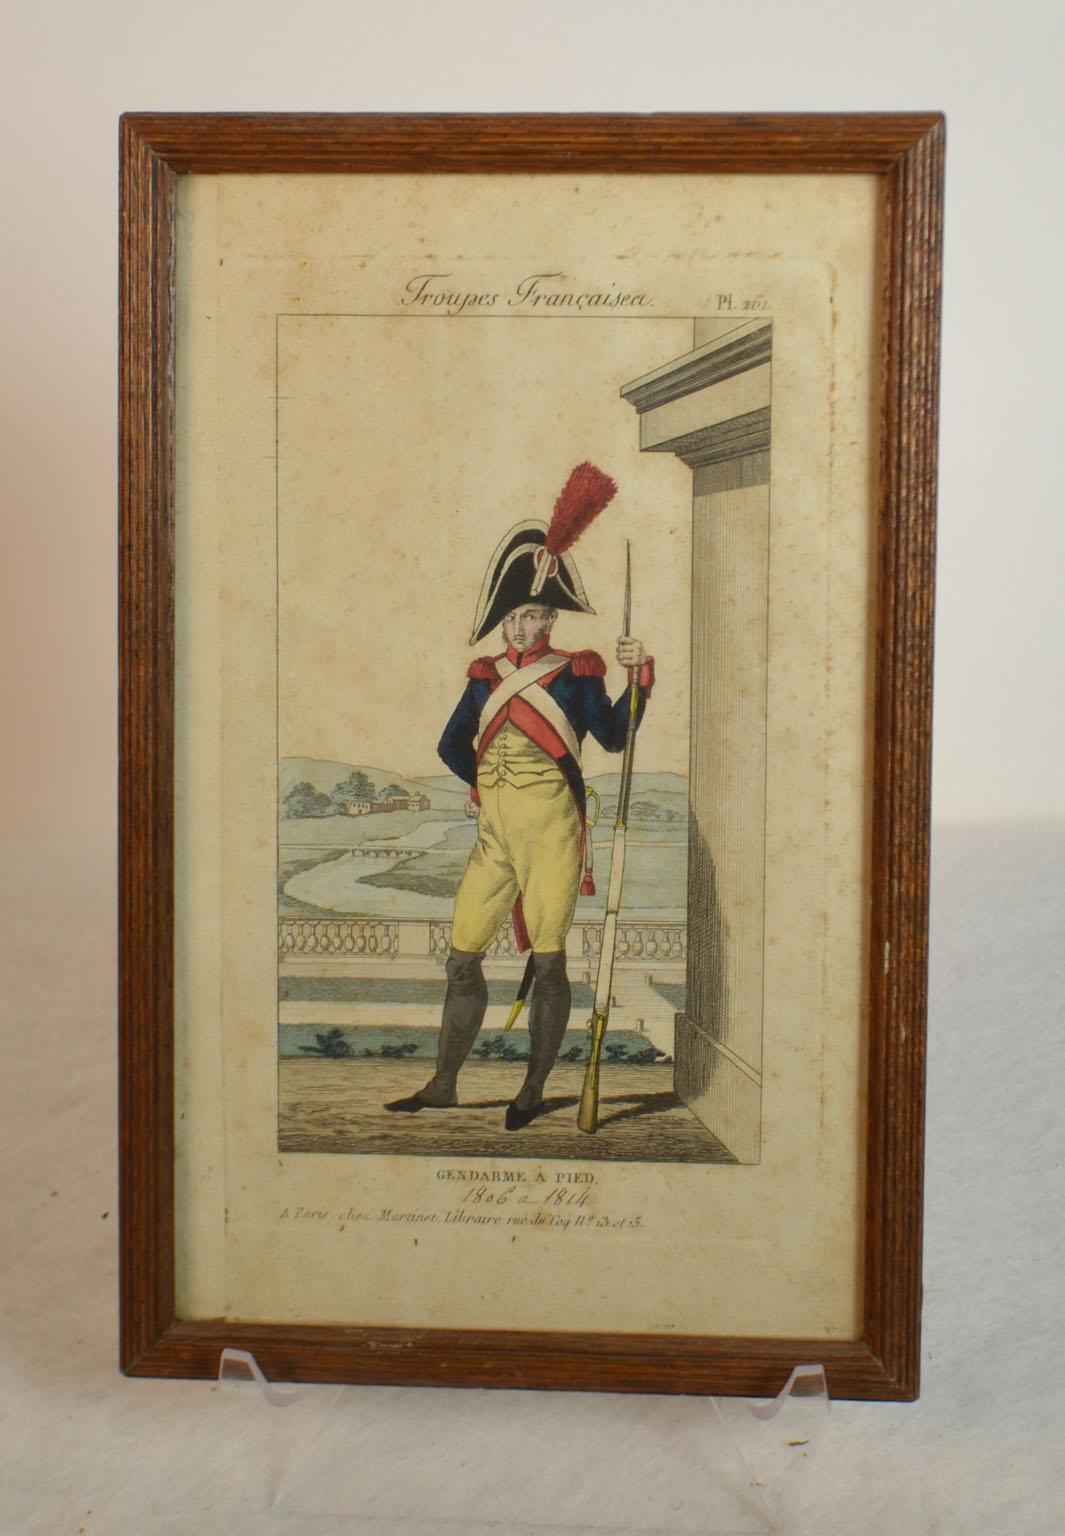 Framed Empire period engraving of French cavalry French troops: Foot Constable. Bookseller A. Martinet in Paris, and Saluden Brest Galarie.